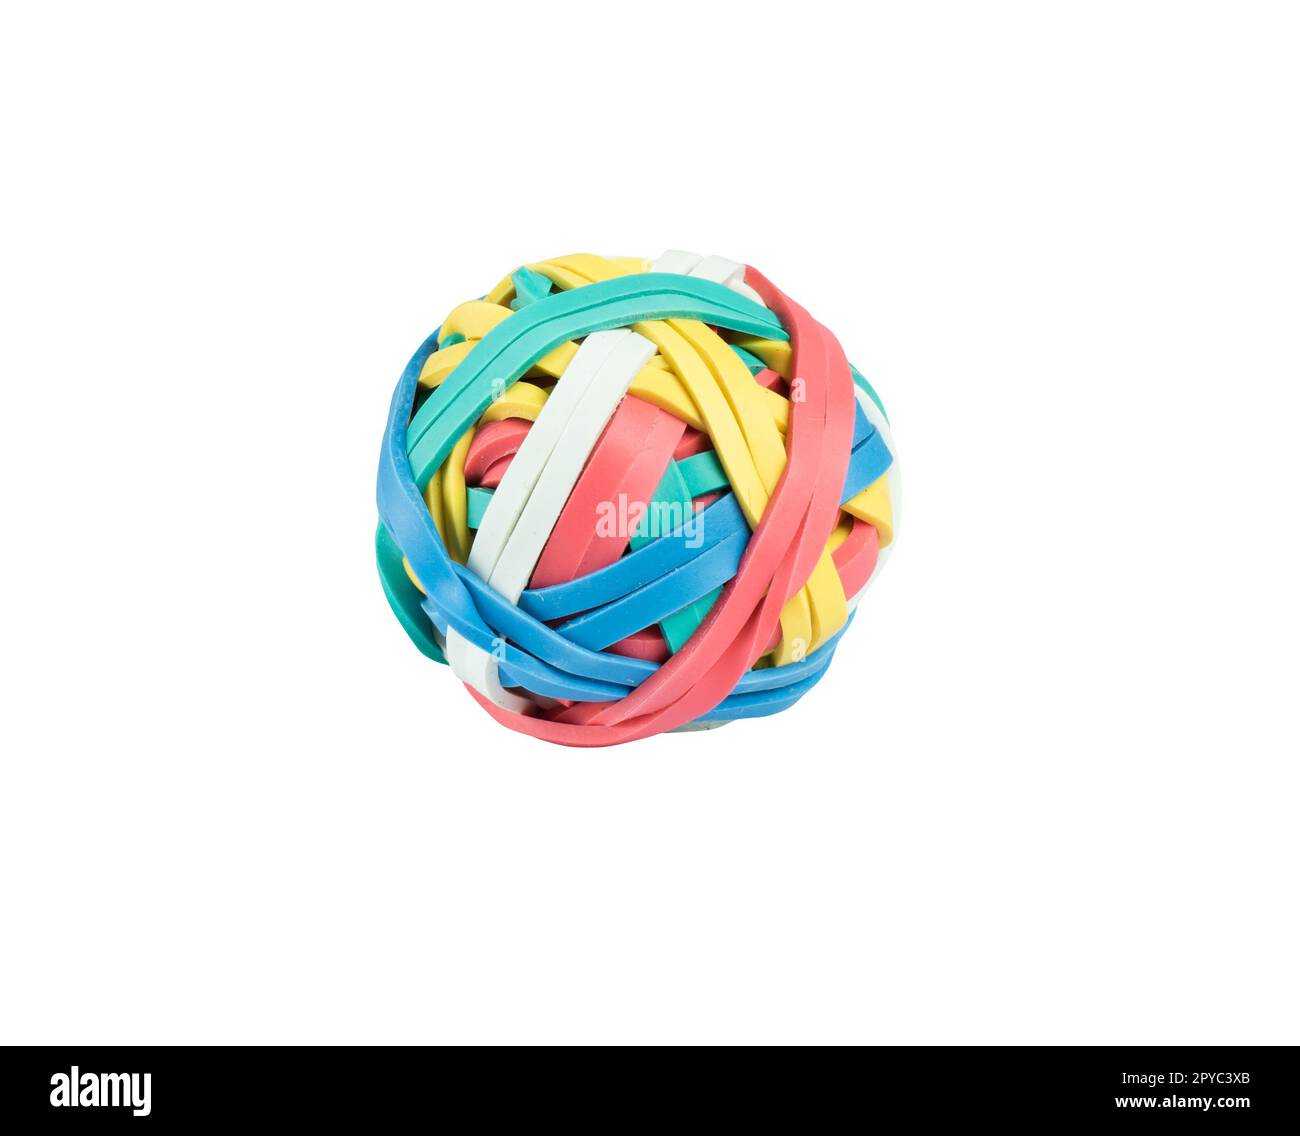 Isolated rubber band ball of colored elastic Stock Photo